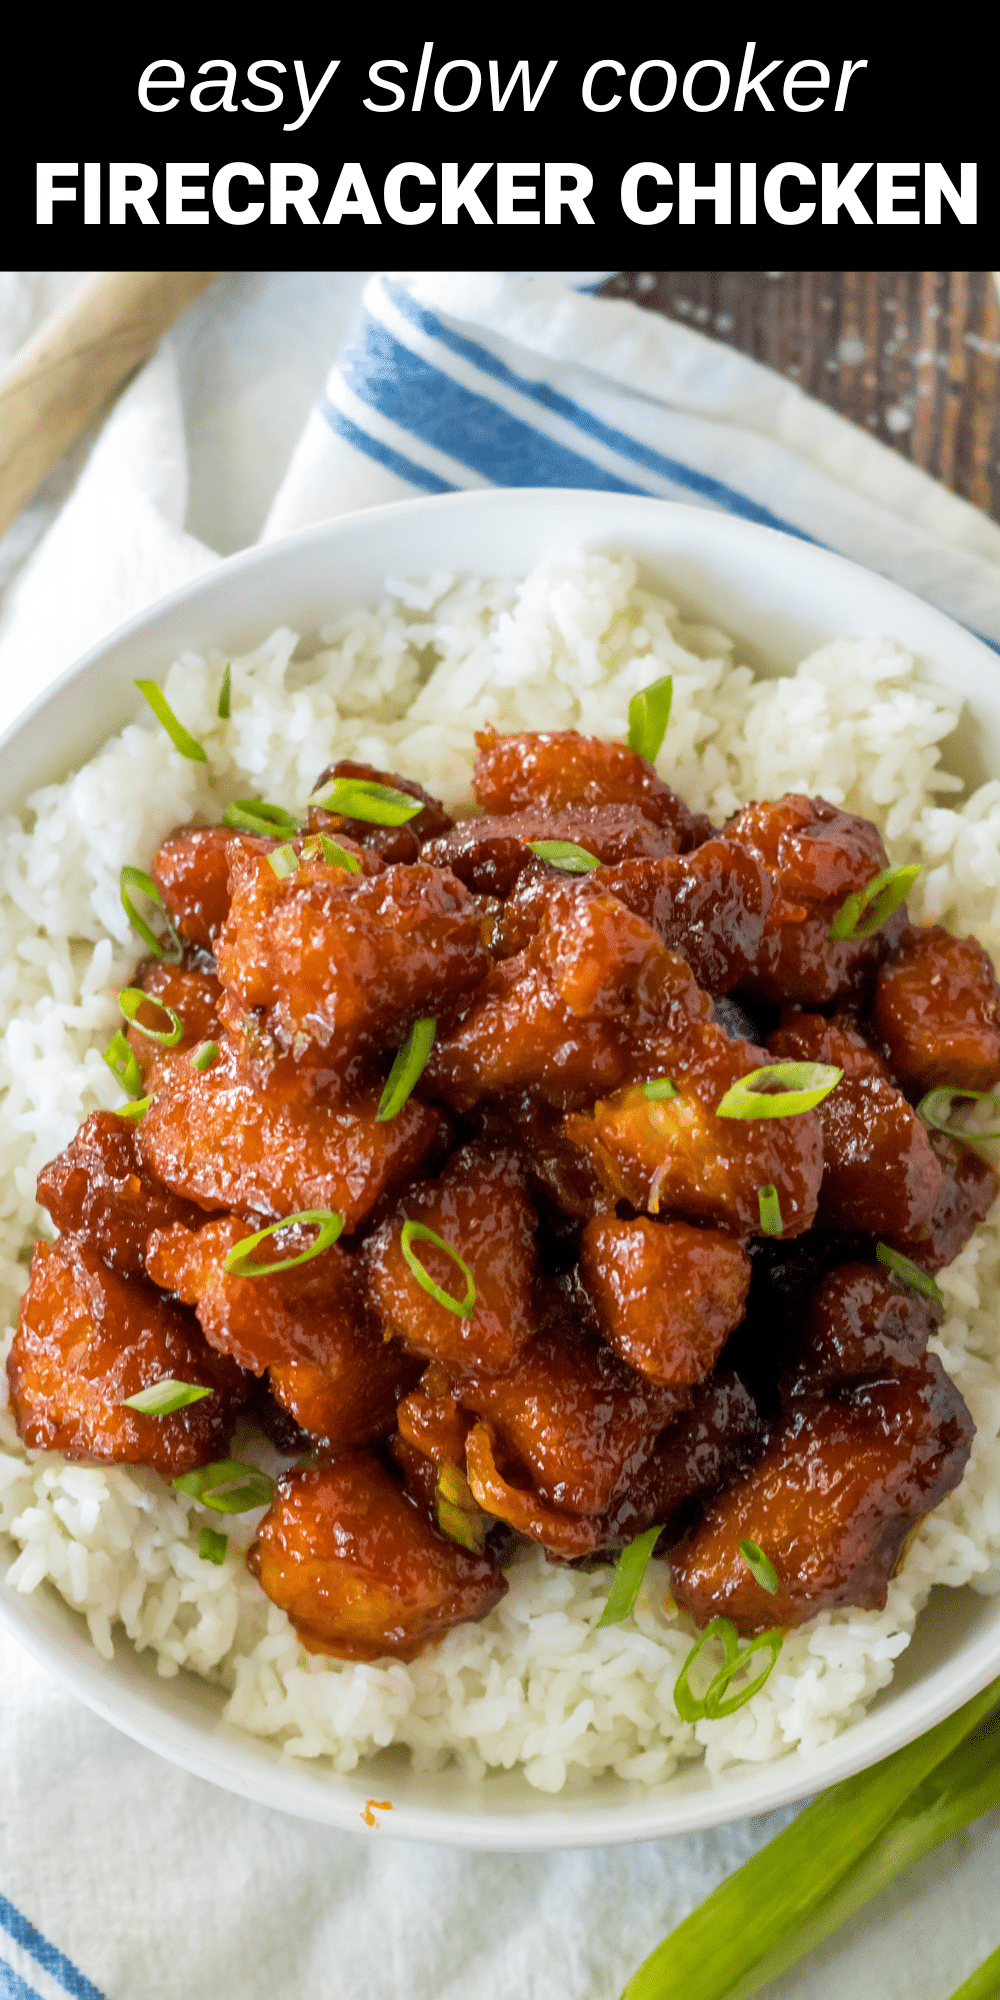 This Slow Cooker Firecracker Chicken has an incredible balance of sweet and spicy ingredients that creates a mouth-watering burst of flavor in every bite. And the best part is, the slow cooker does most of the work for you, making it the perfect weeknight meal. 